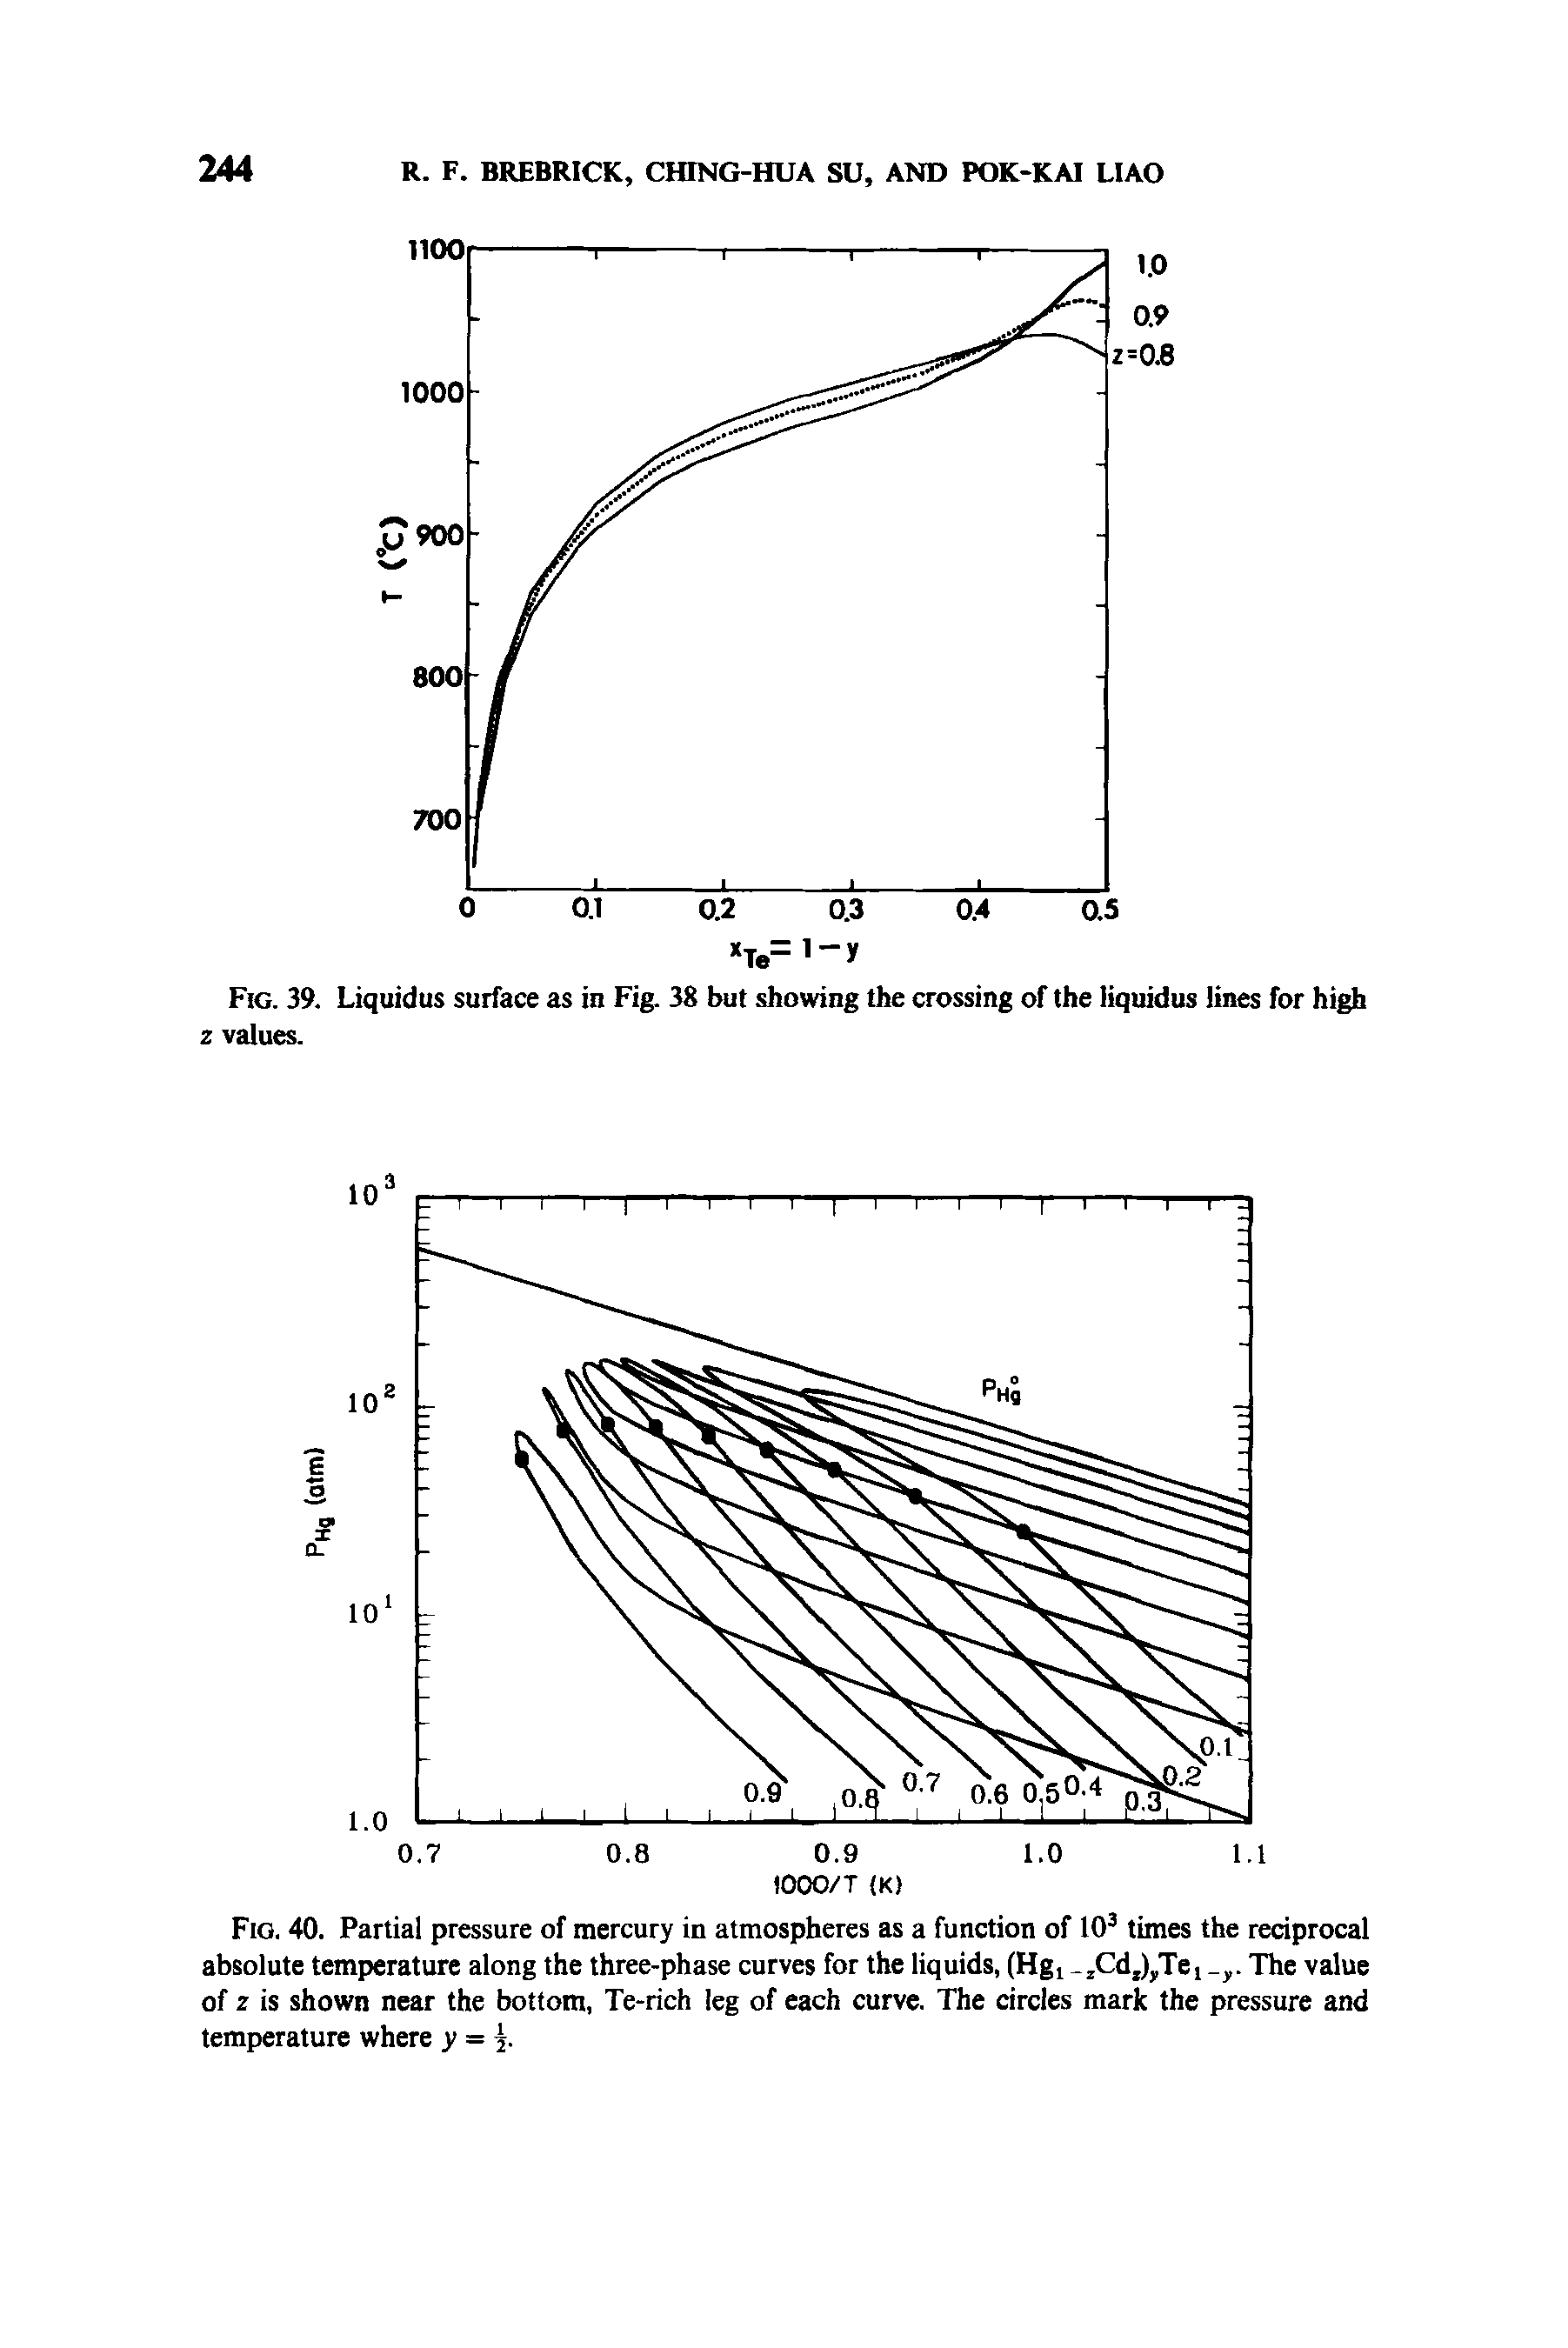 Fig. 40. Partial pressure of mercury in atmospheres as a function of 103 times the reciprocal absolute temperature along the three-phase curves for the liquids, (Hg . zCd2)yTei The value of z is shown near the bottom, -rich leg of each curve. The circles mark the pressure and temperature where =. ...